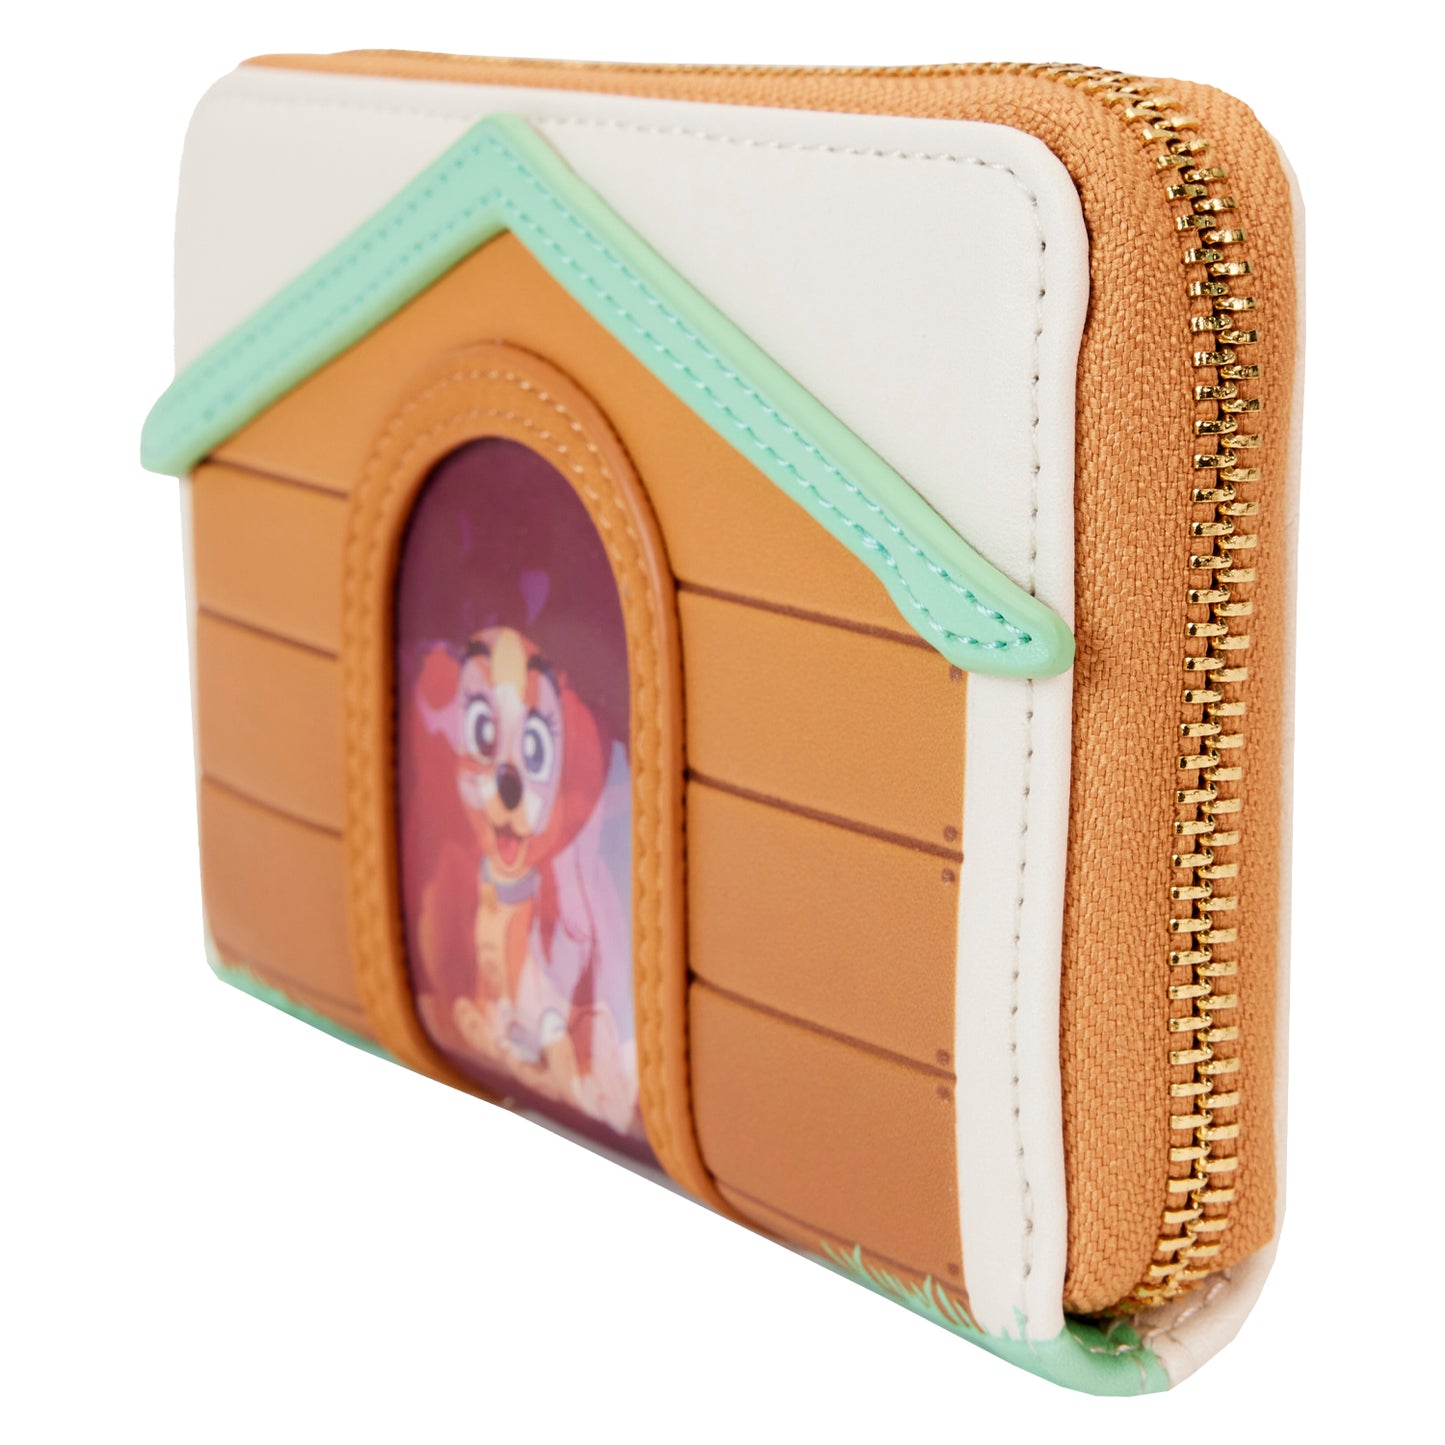 I Heart Disney Dogs Doghouse Triple Lenticular Zip Around Wallet LFY